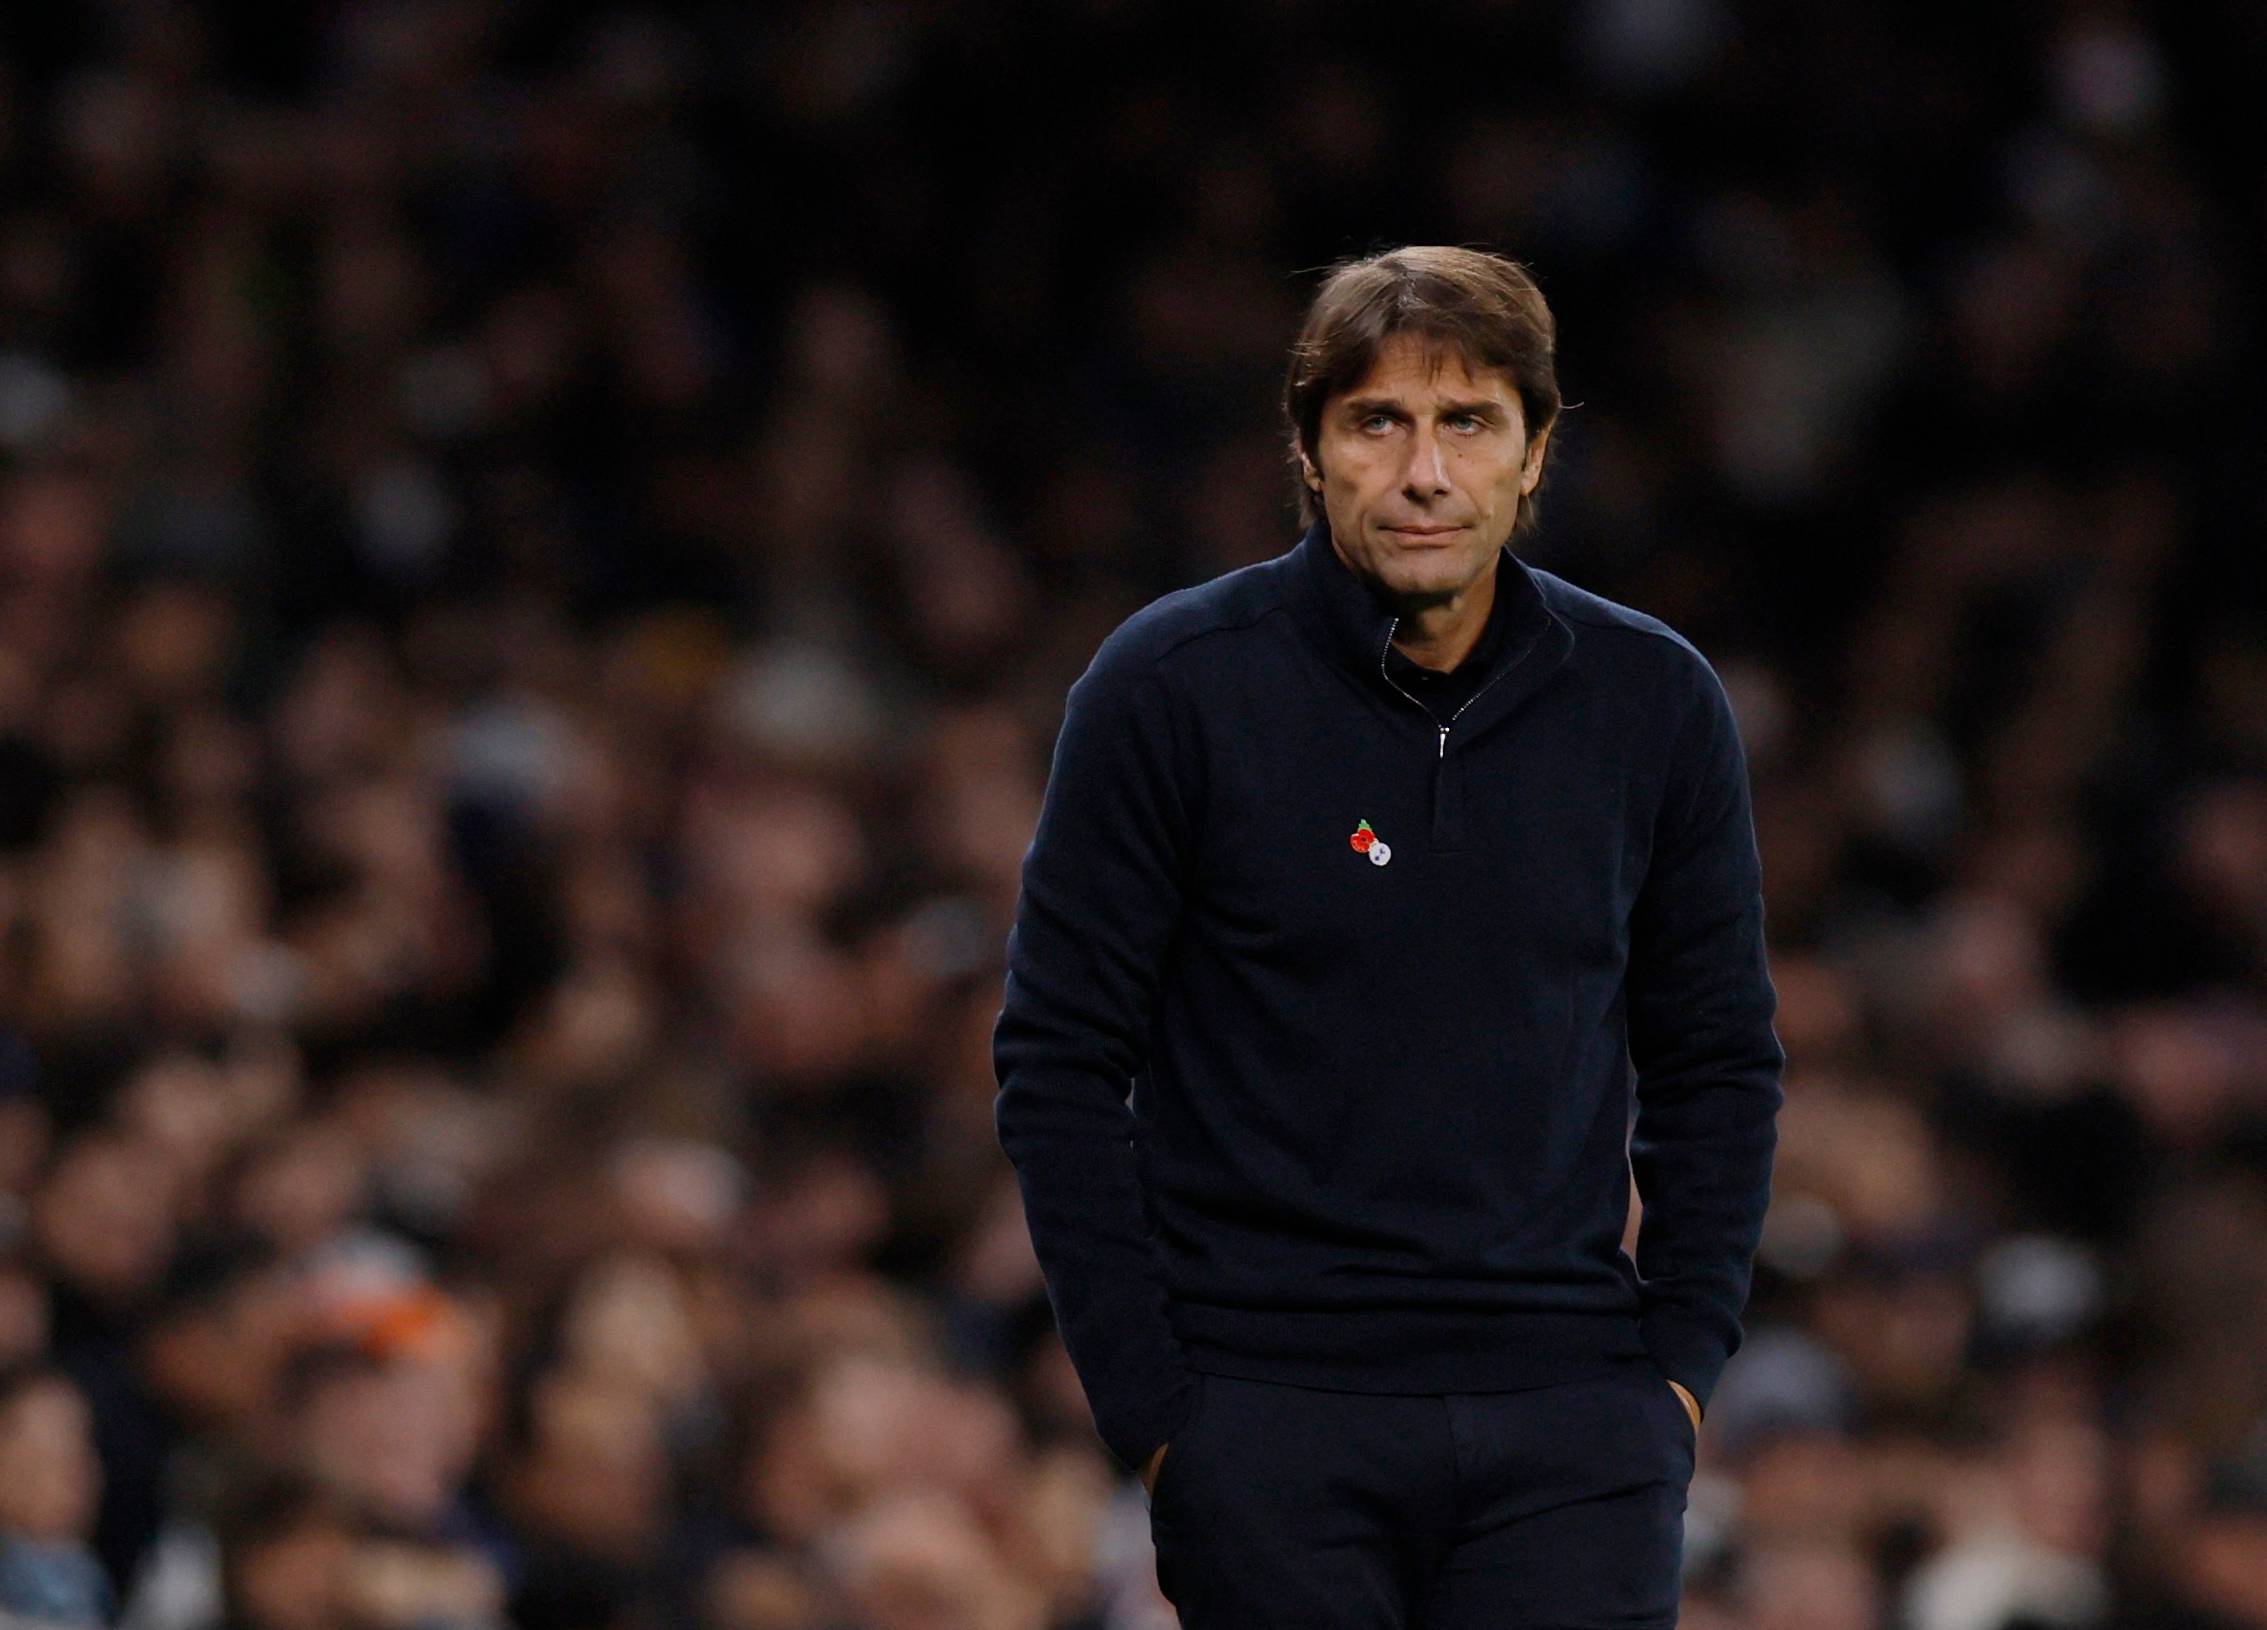 Antonio Conte on the touchline during Tottenham Hotspur's encounter with Liverpool